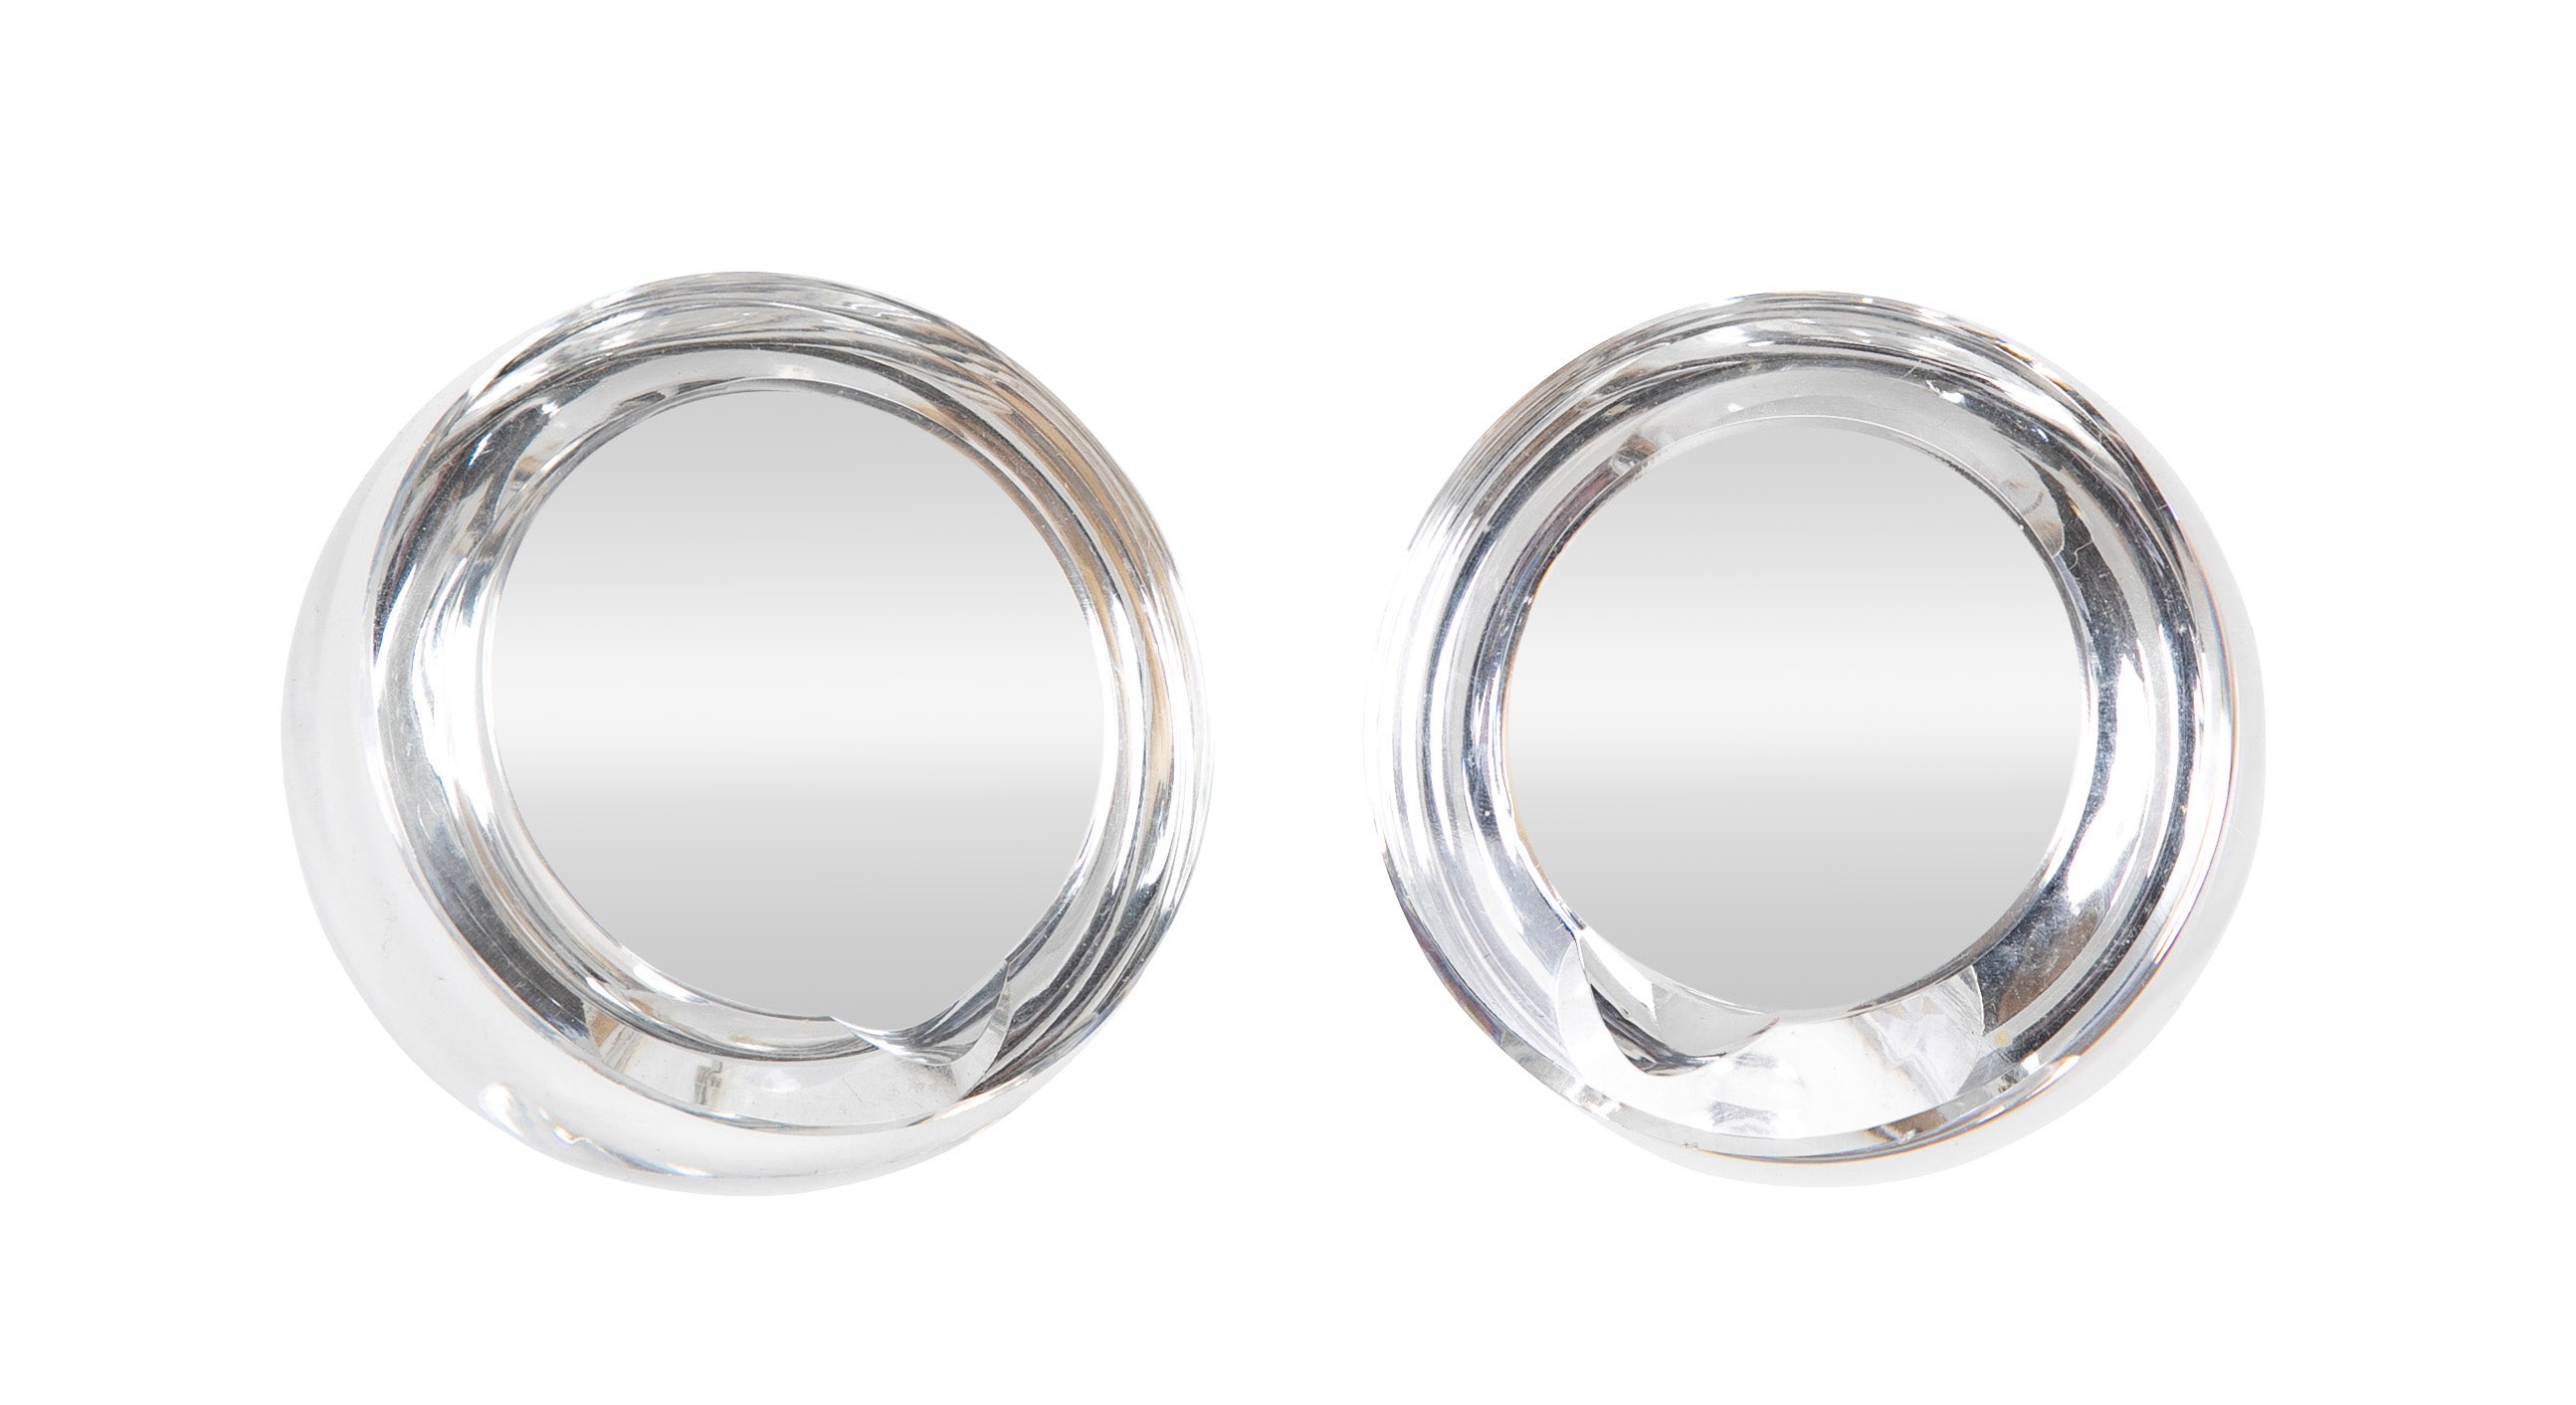 Two Spherical Glass Ashtrays by Baccarat  -  Priced Individually